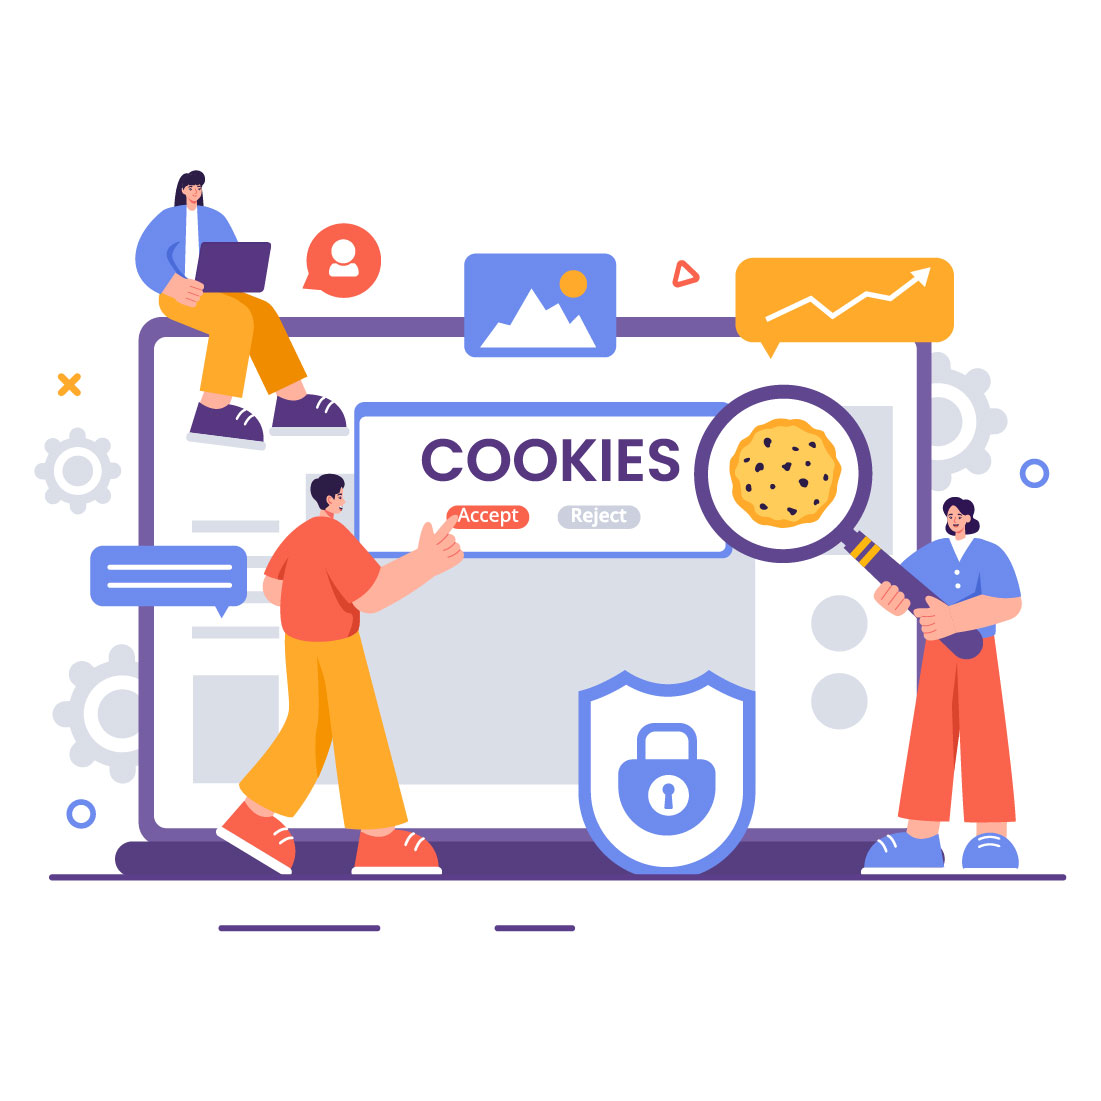 9 Internet Cookies Technology Illustration cover image.